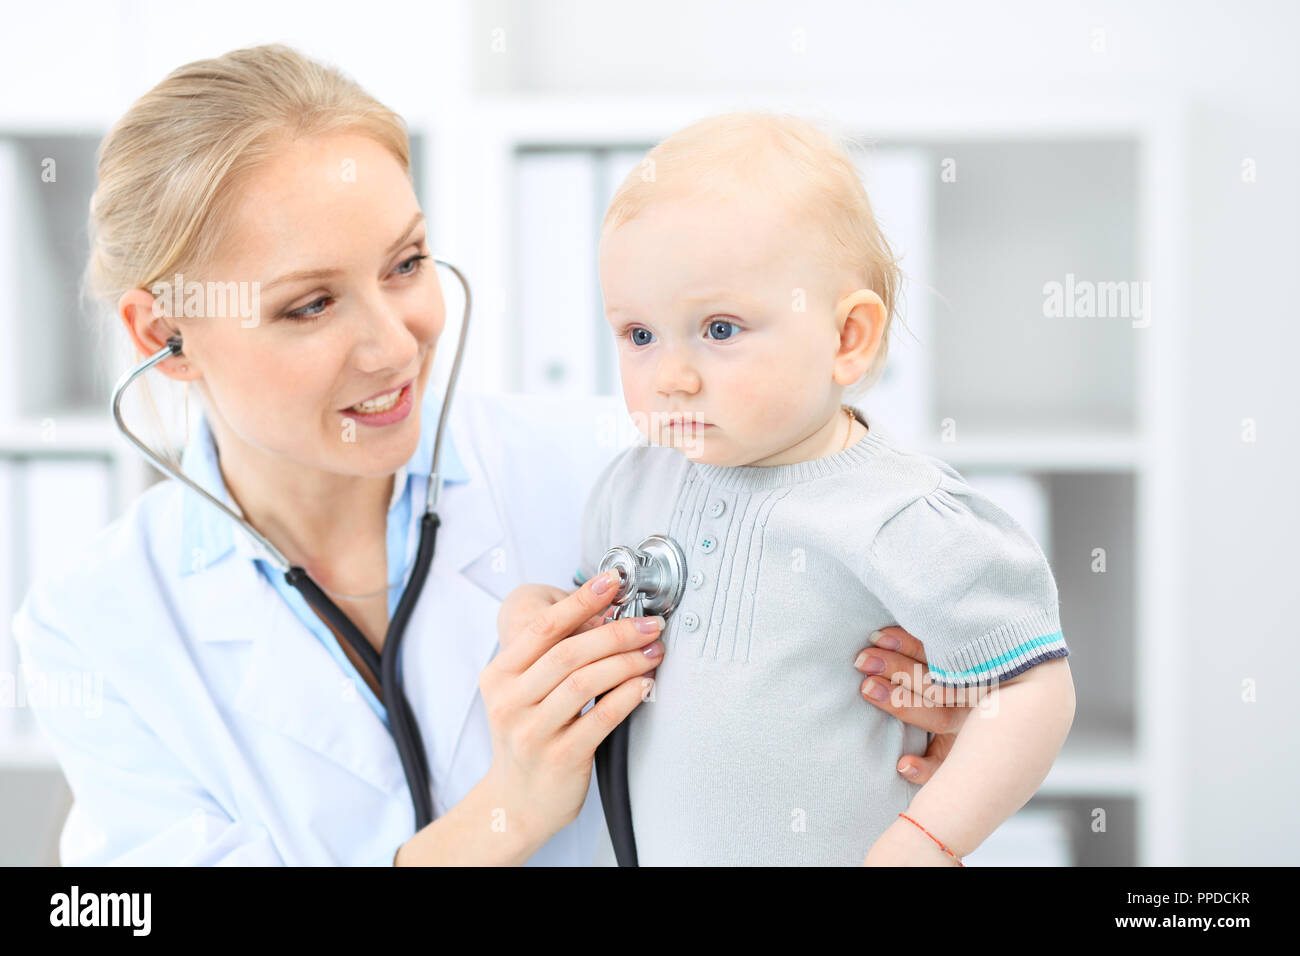 Doctor and patient in hospital. Little girl is being examined by pediatrician with stethoscope. Medicine and health care Stock Photo